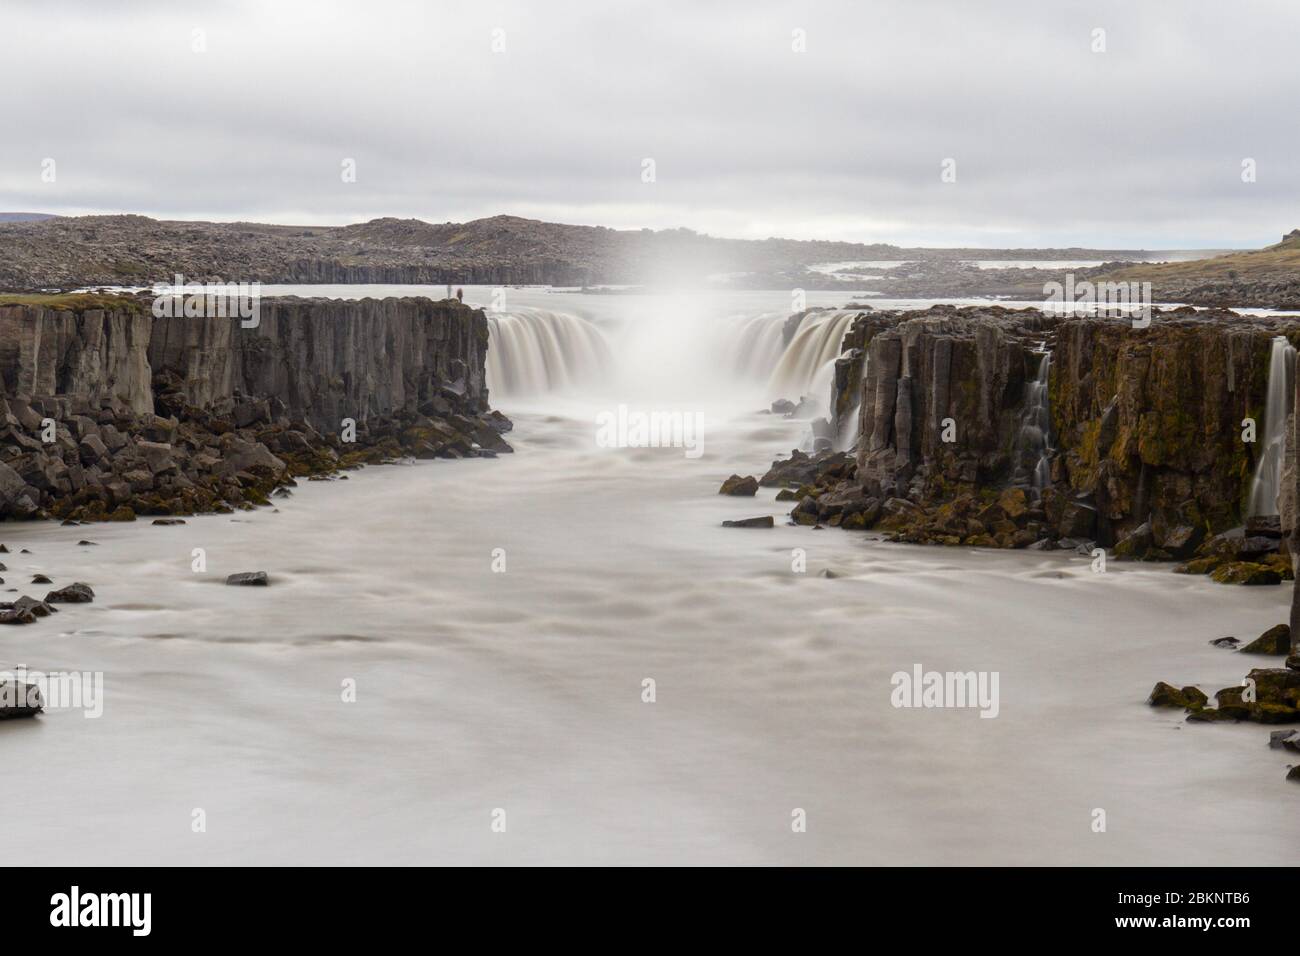 Long exposure of the Selfoss waterfall in the Jökulsárgljúfur canyon upriver from the more famous Dettifoss waterfall, northern Iceland. Stock Photo